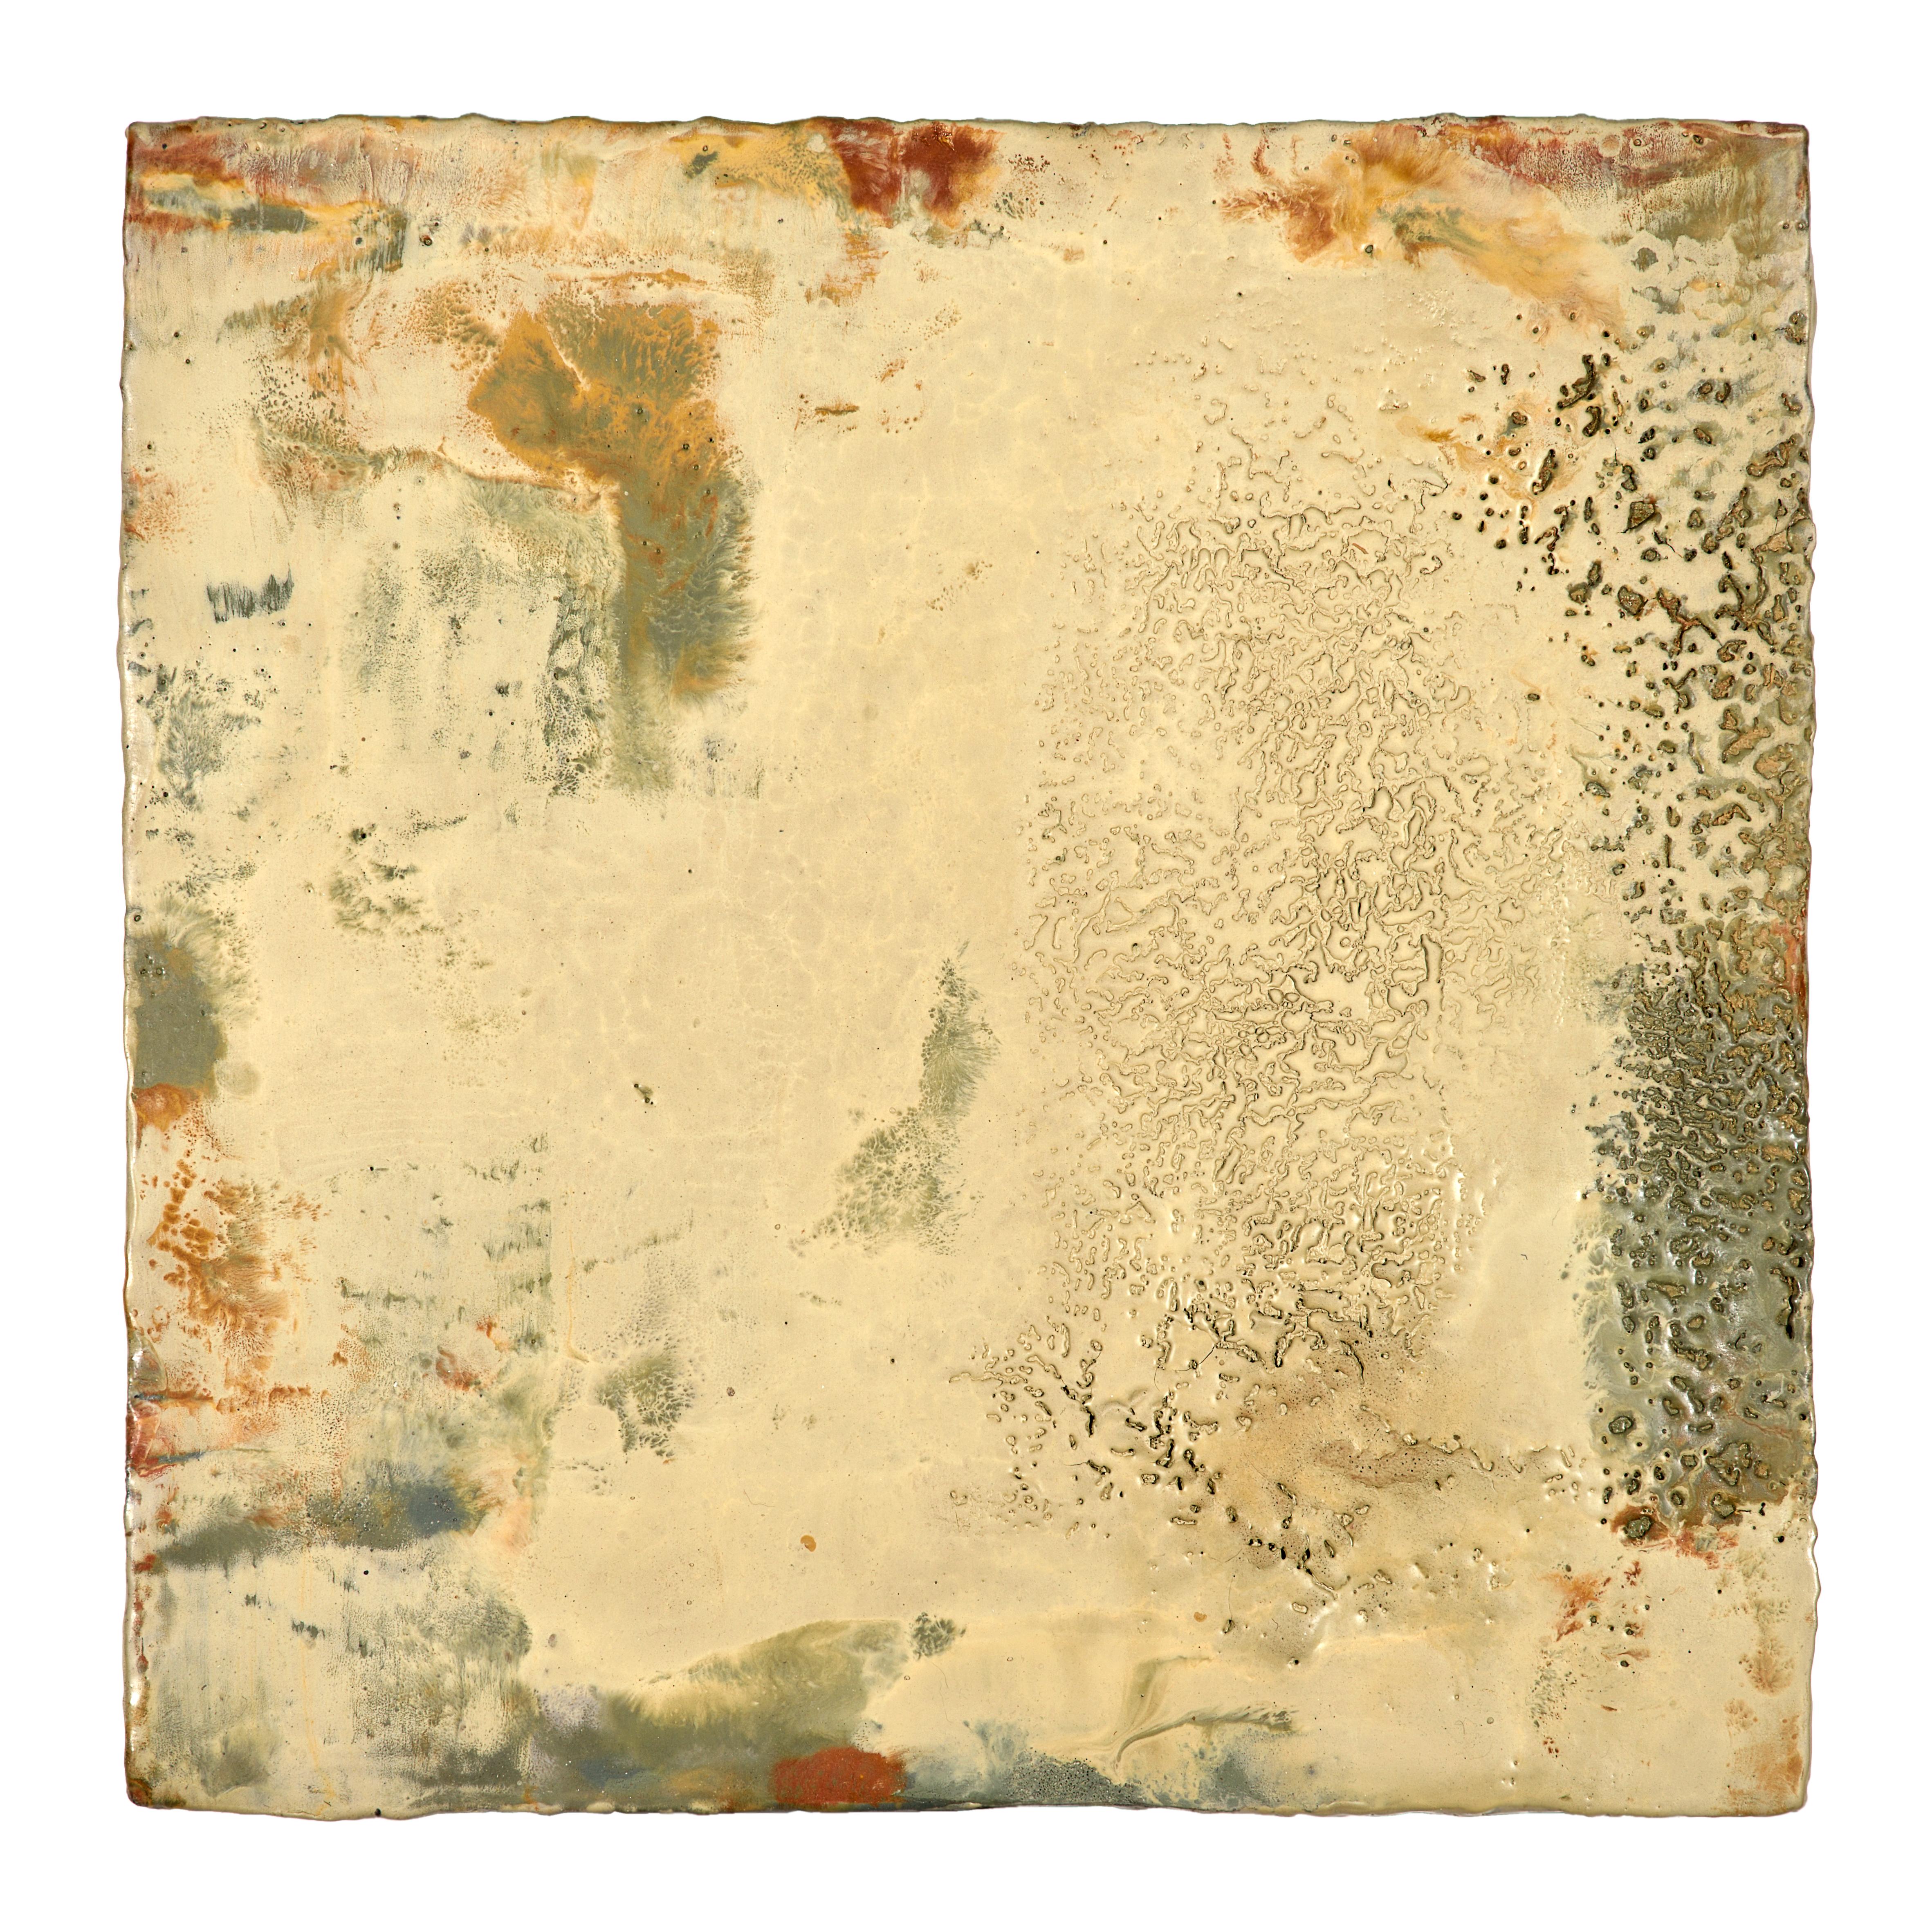 Modern Richard Hirsch Encaustic Painting of Nothing #44, 2015 For Sale